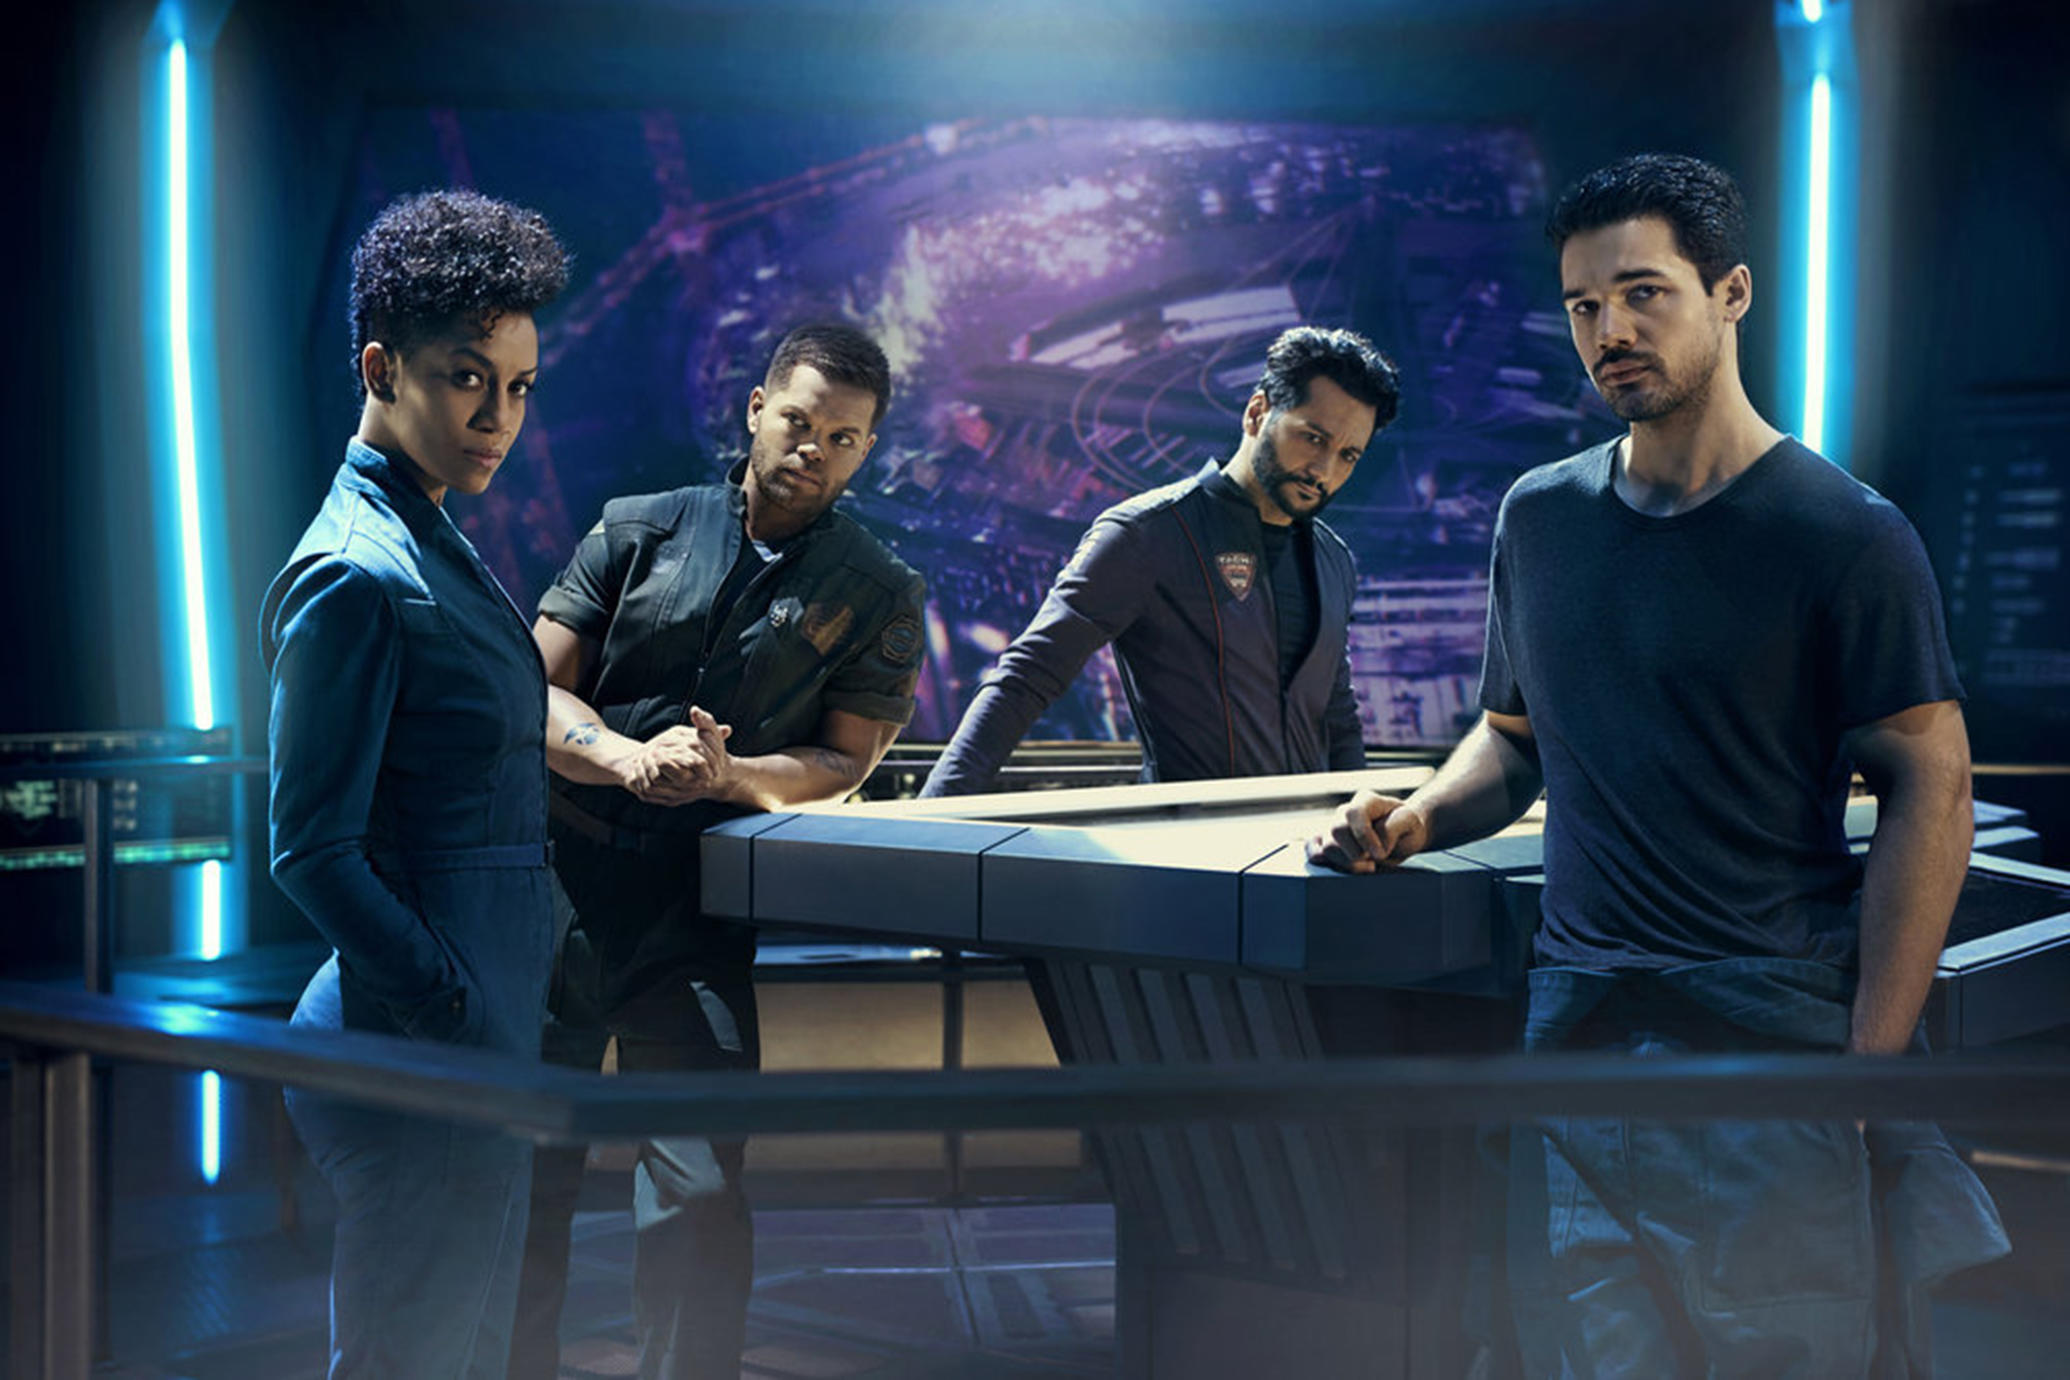 Amazon Has Officially Renewed ‘The Expanse’ For a 4th Season